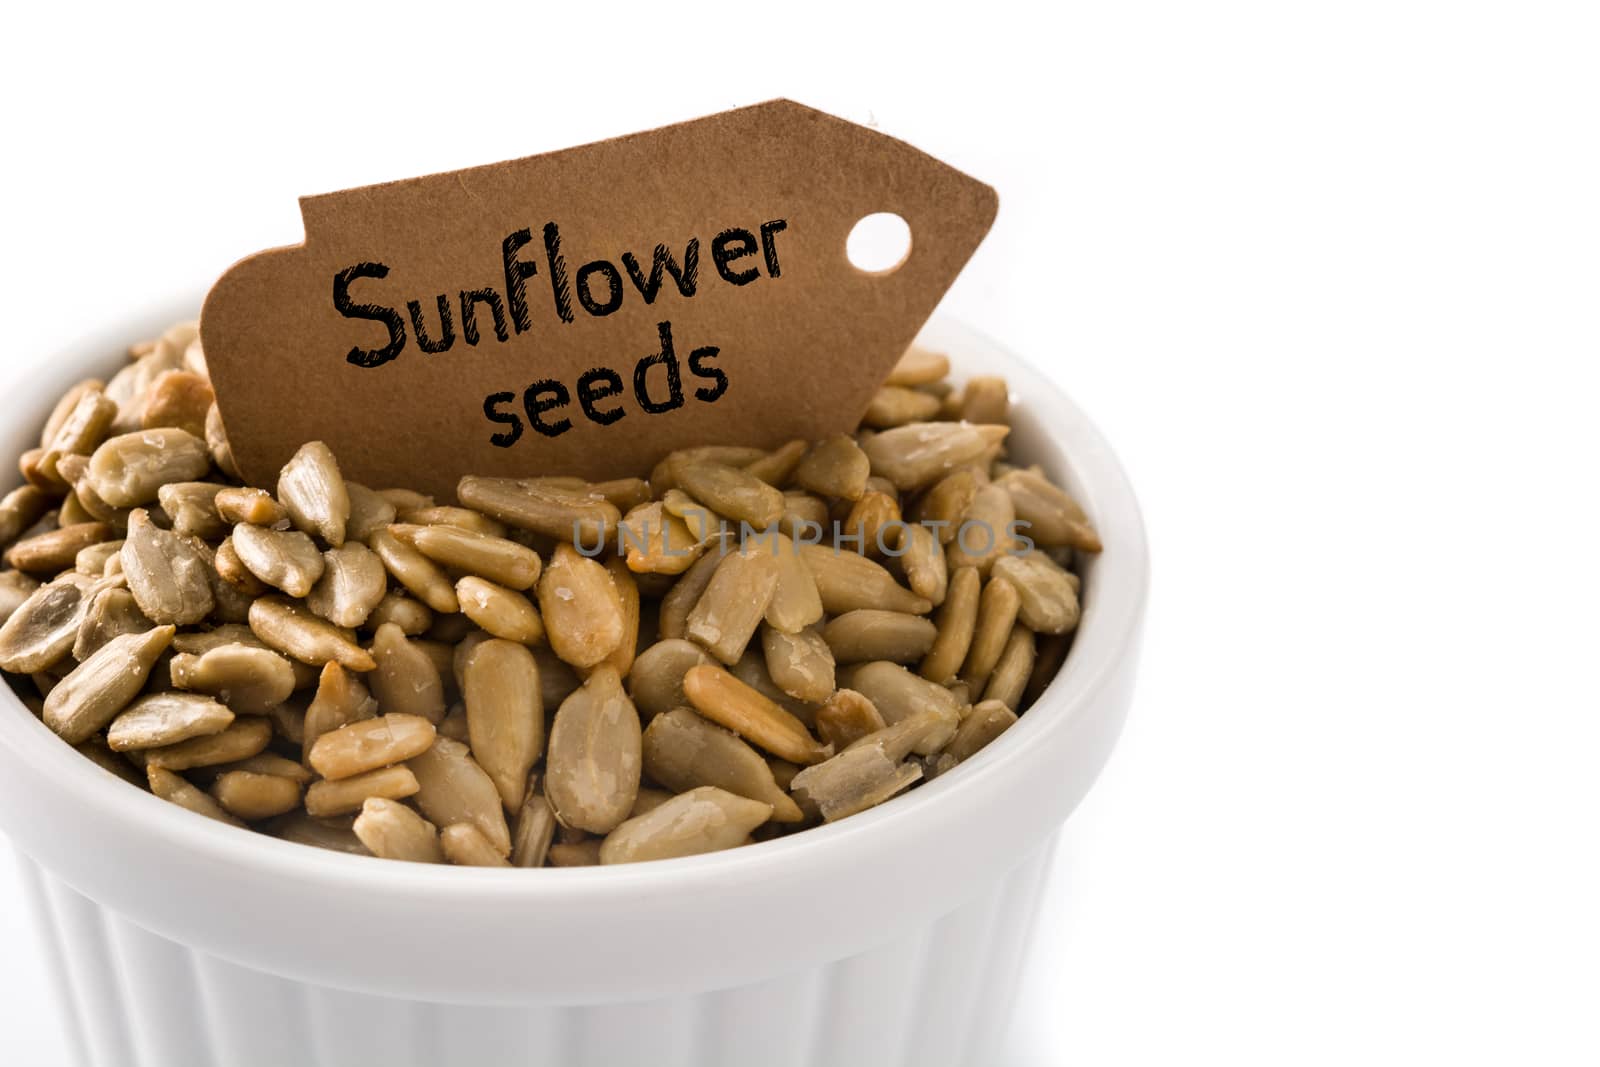 Sunflower seeds in bowl  by chandlervid85